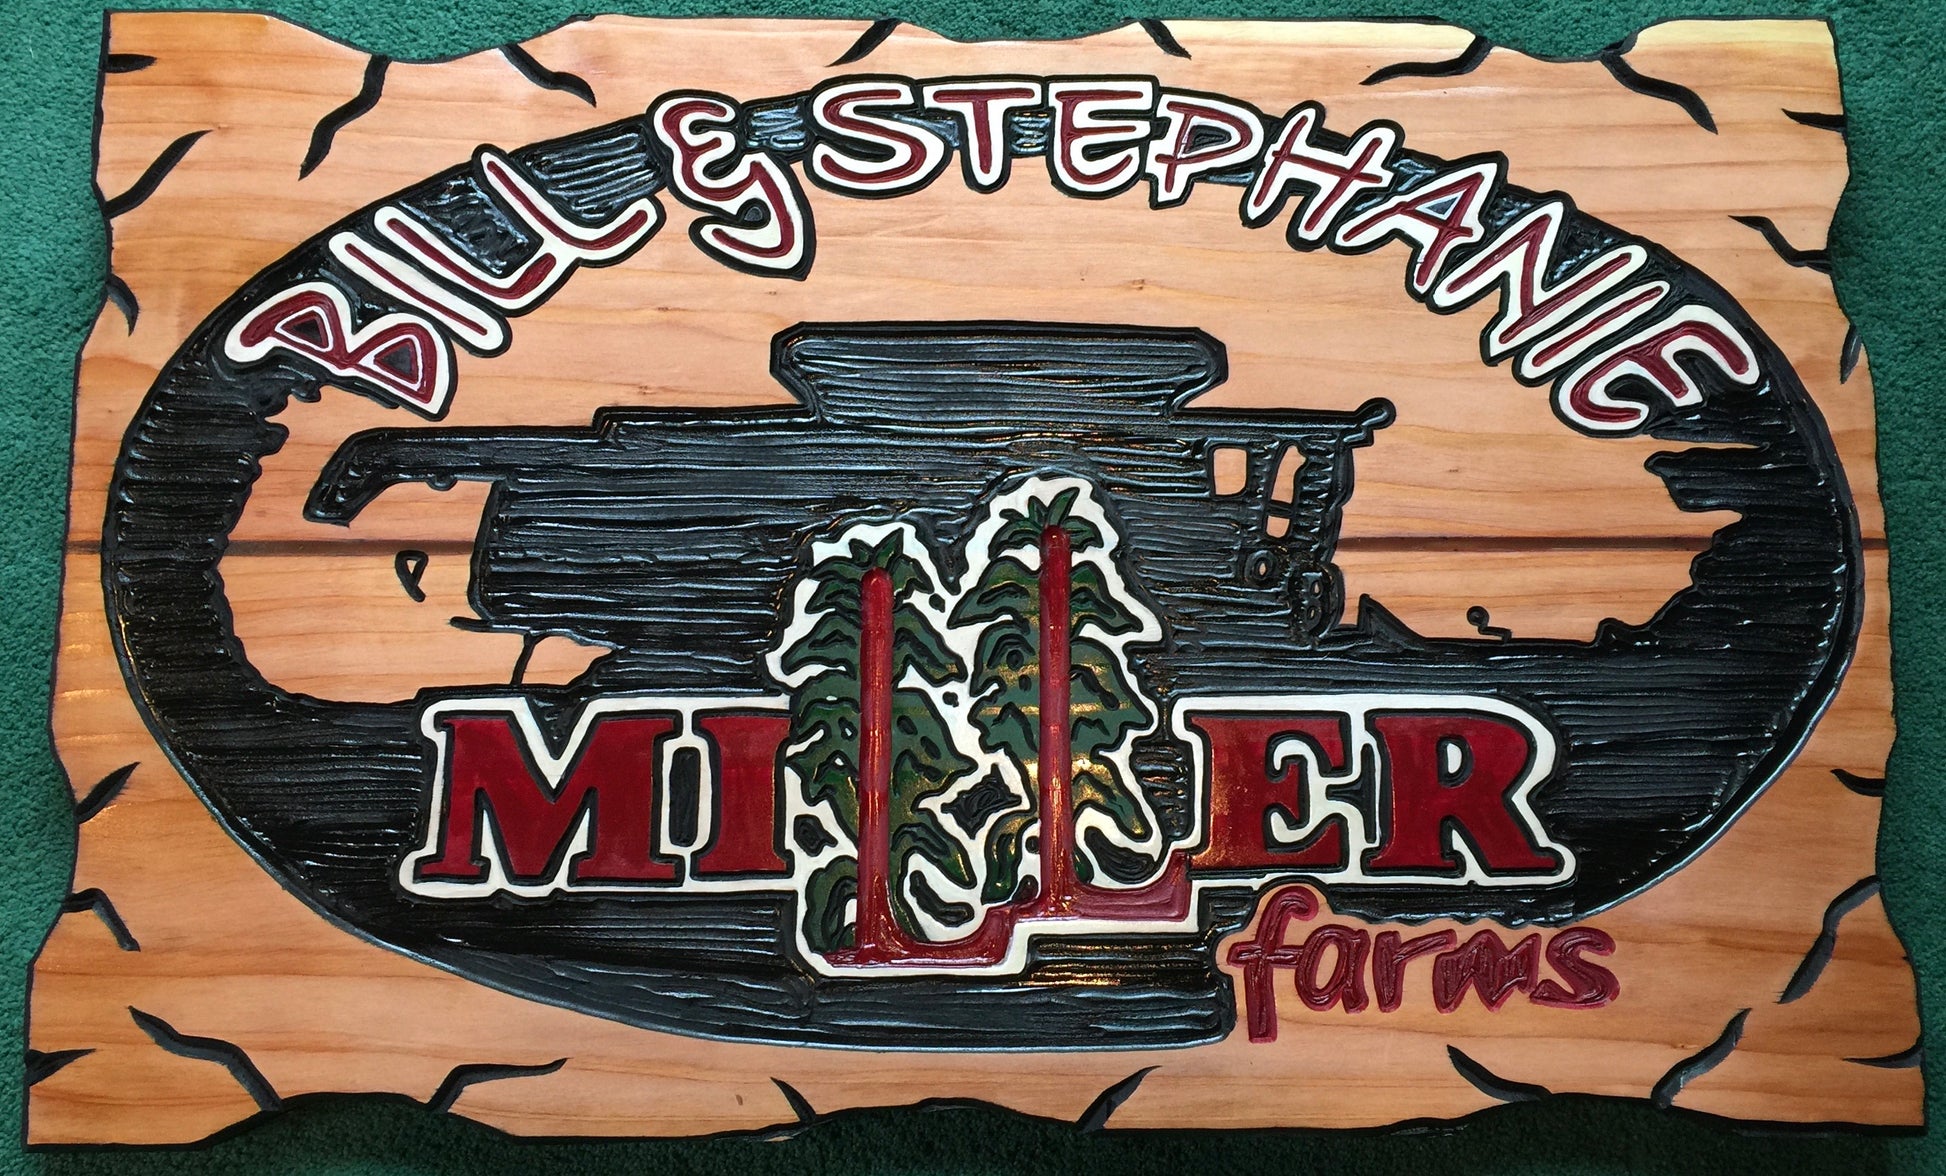 2’x4’ CUSTOM REDWOOD SIGN WITH YOUR LOGO!